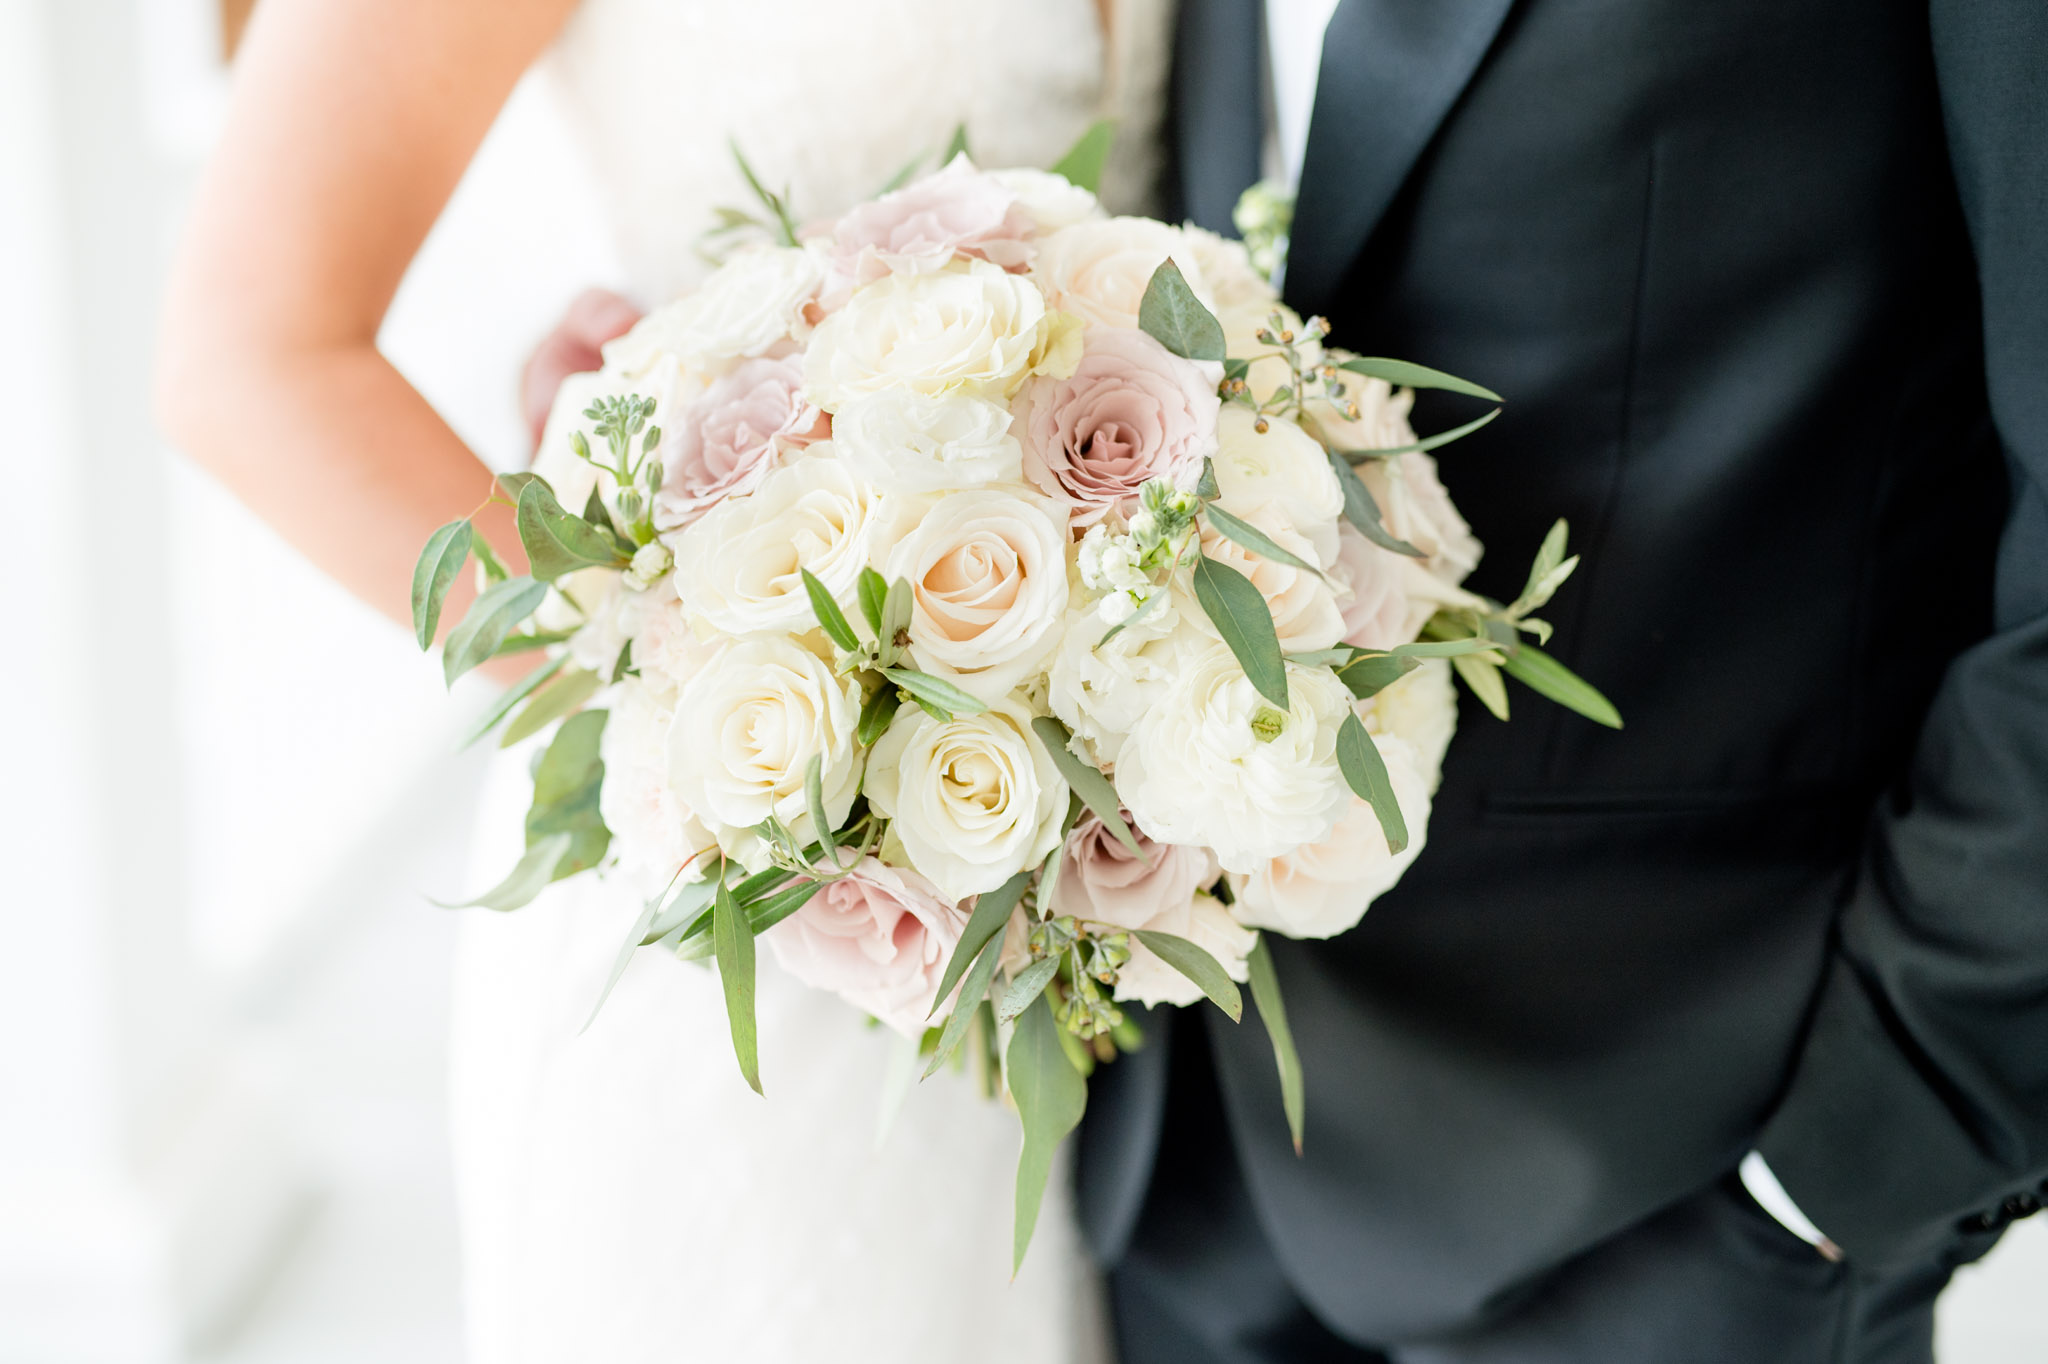 Bride holds white, cream, and pink flowers.